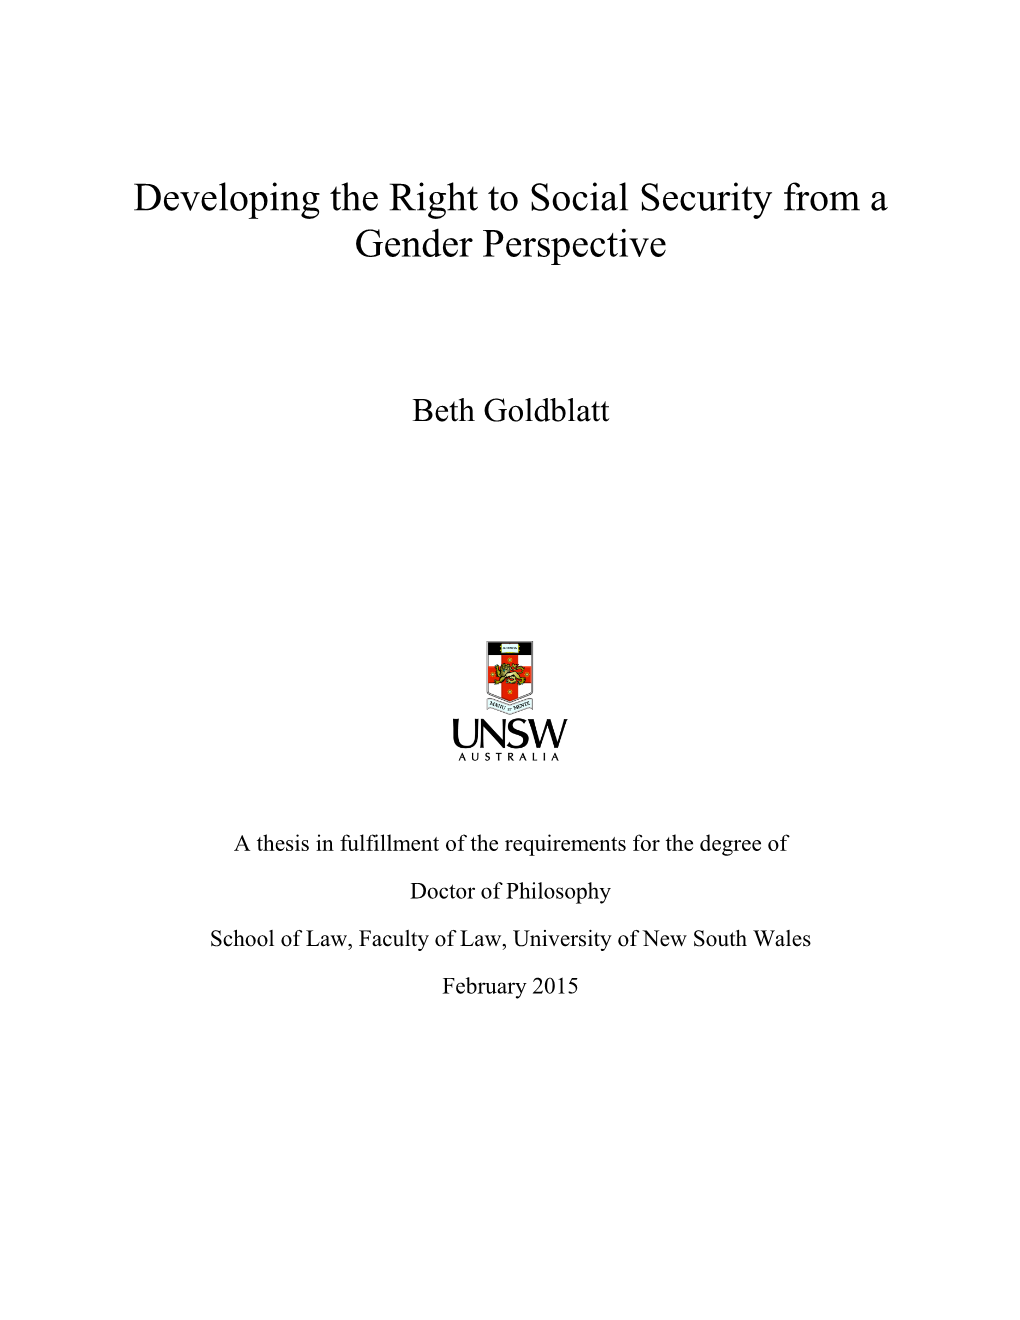 Developing the Right to Social Security from a Gender Perspective